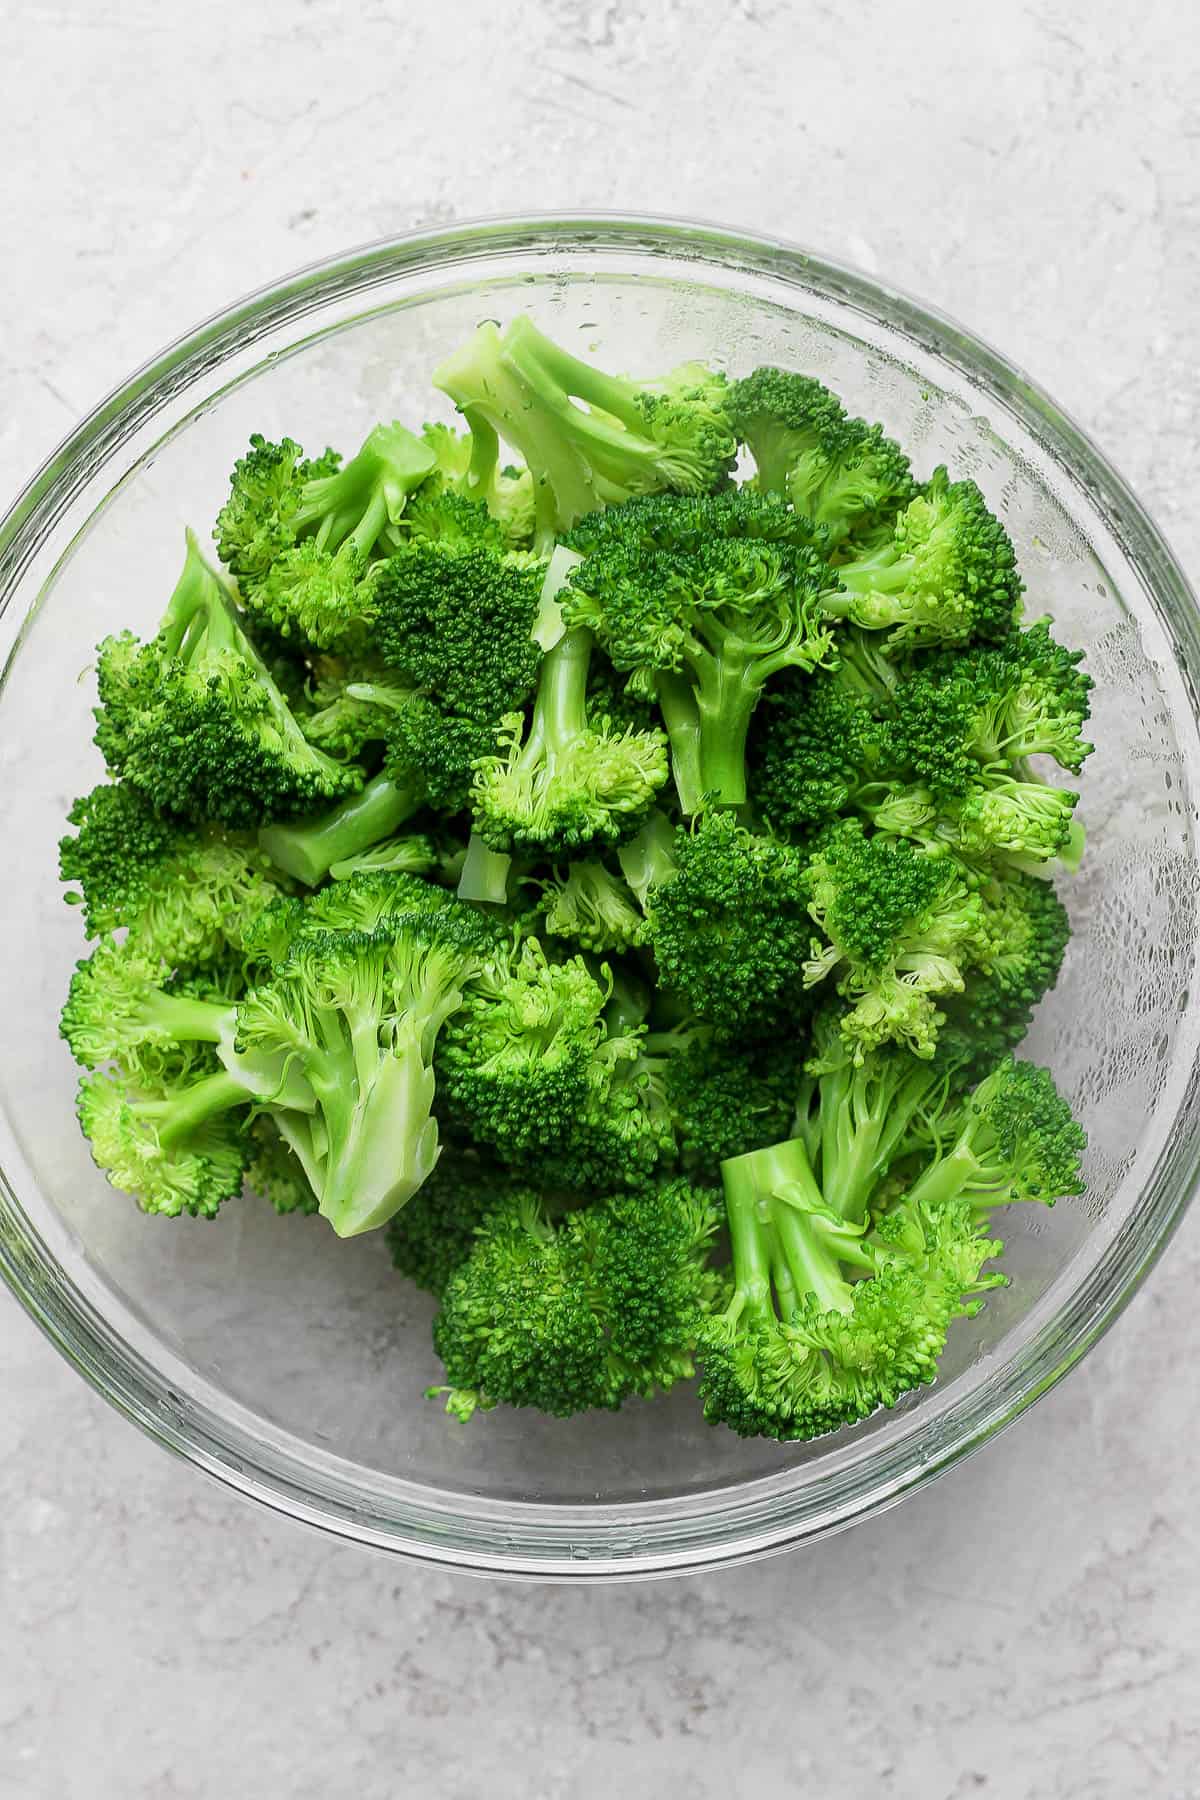 Steamed broccoli in a glass bowl.